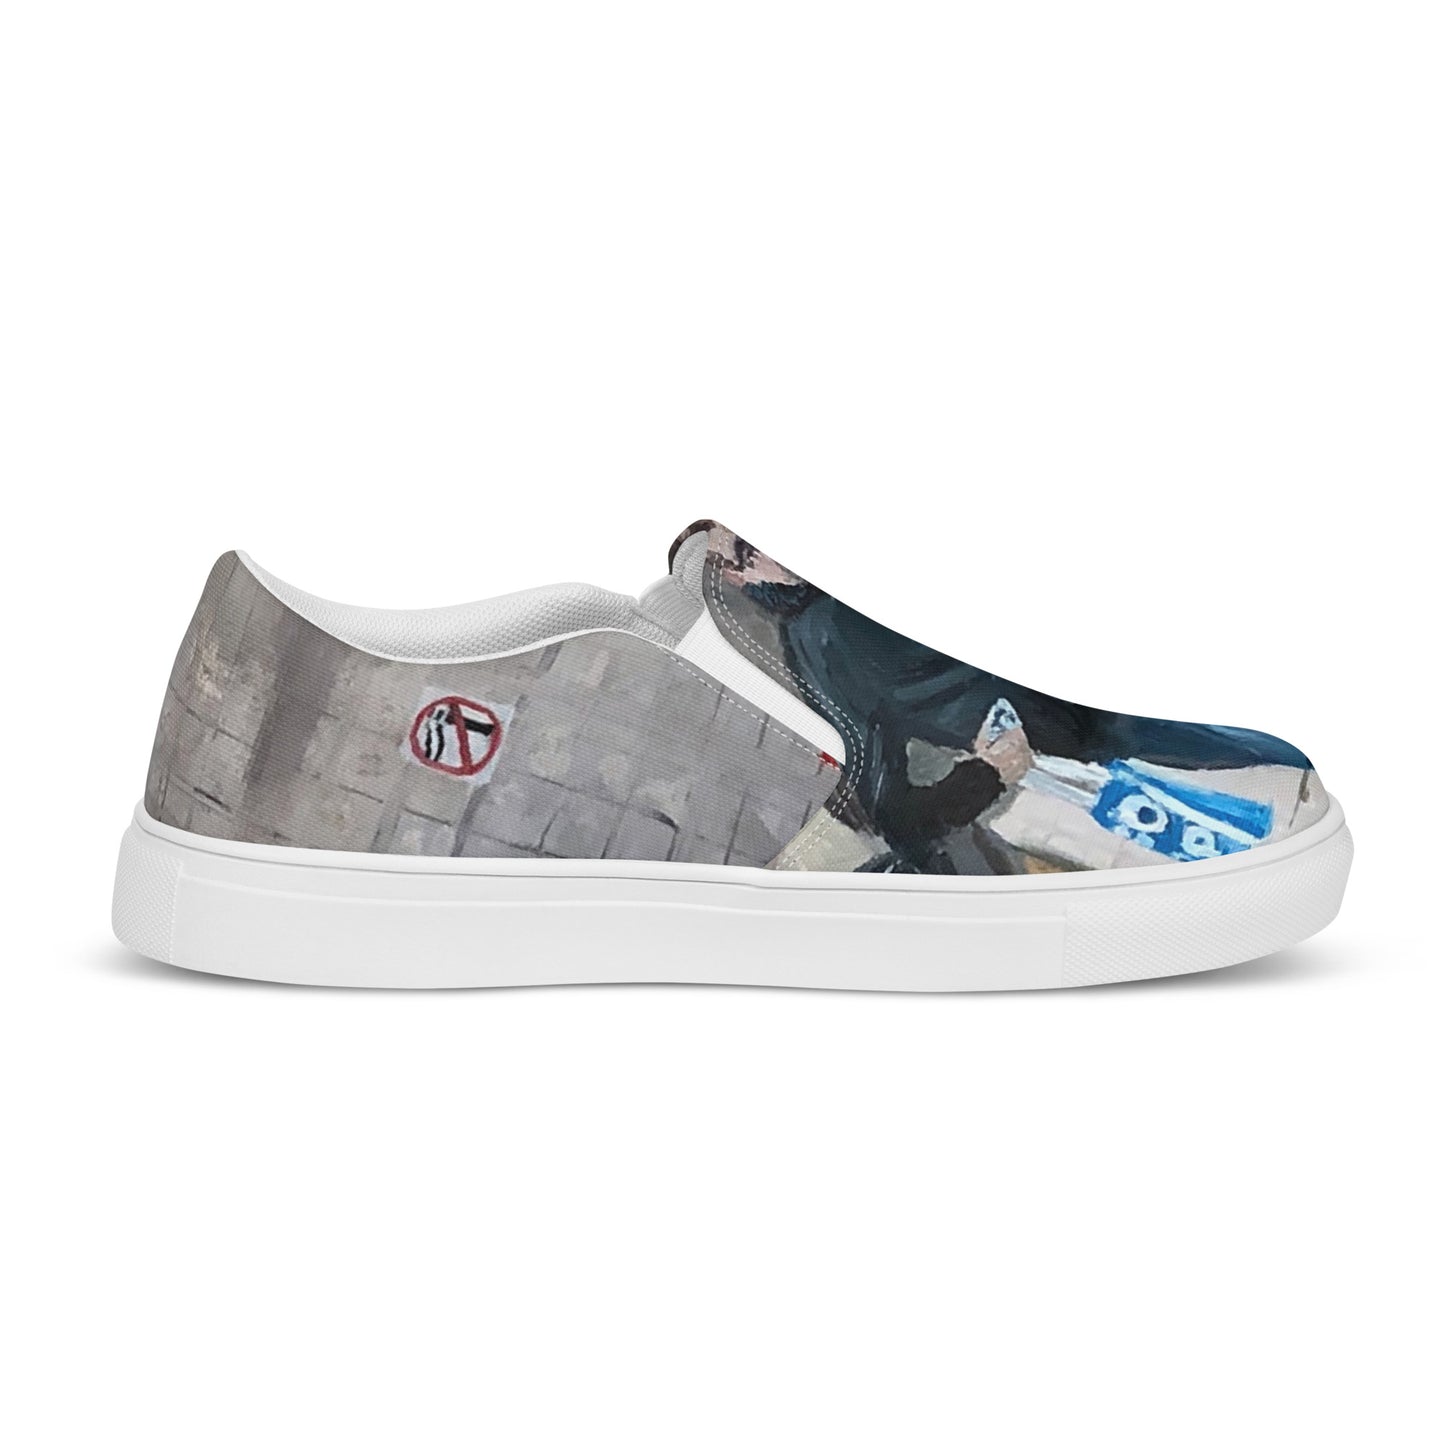 Head Down to the Chippy - Women’s slip-on canvas shoes